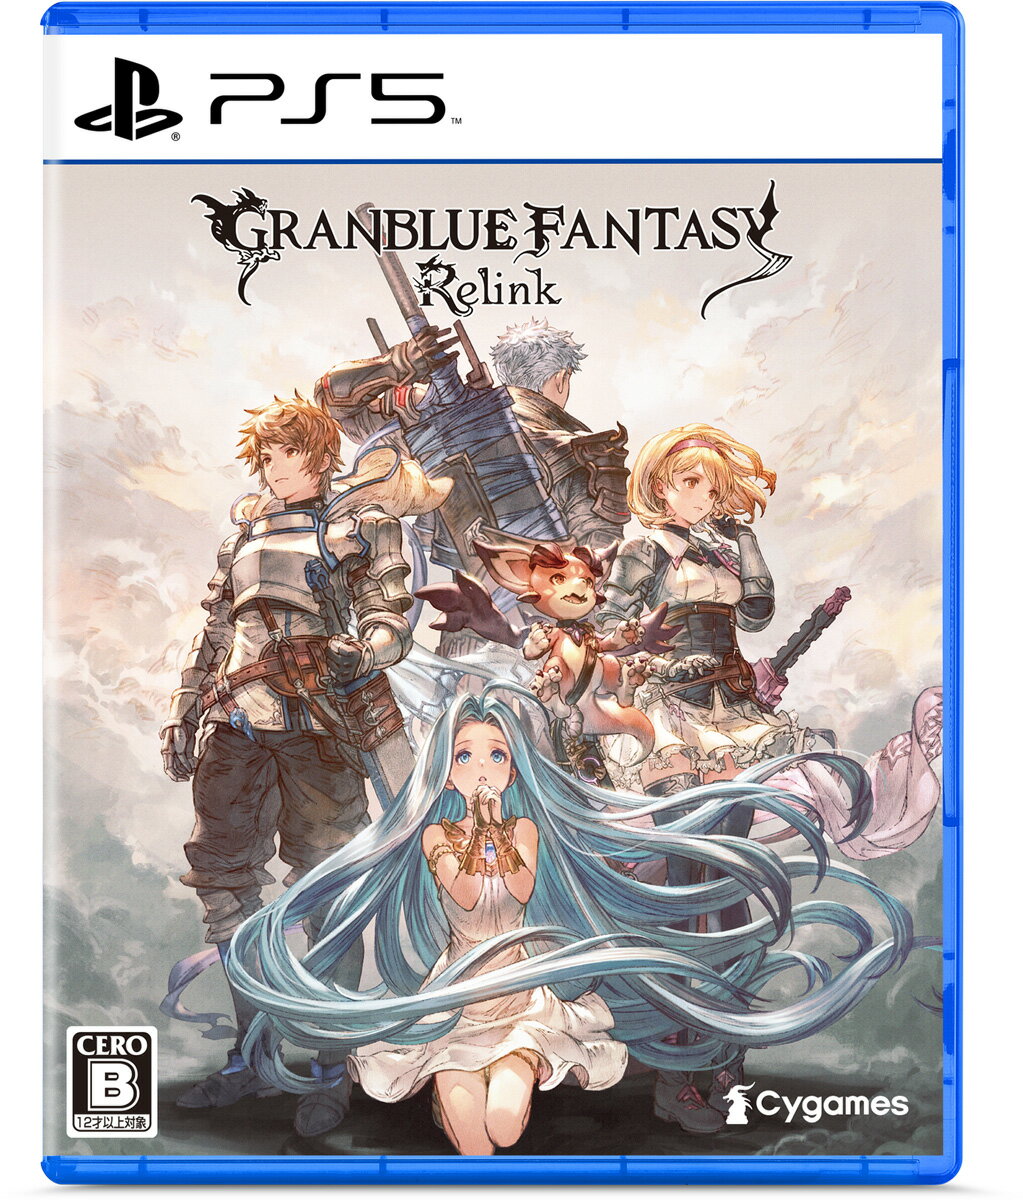 Cygames 【PS5】GRANBLUE FANTASY___ Relink　通常版 [ELJS-20050 PS5 <strong>グランブルーファンタジー</strong> <strong>リリンク</strong> ツウジョウ]